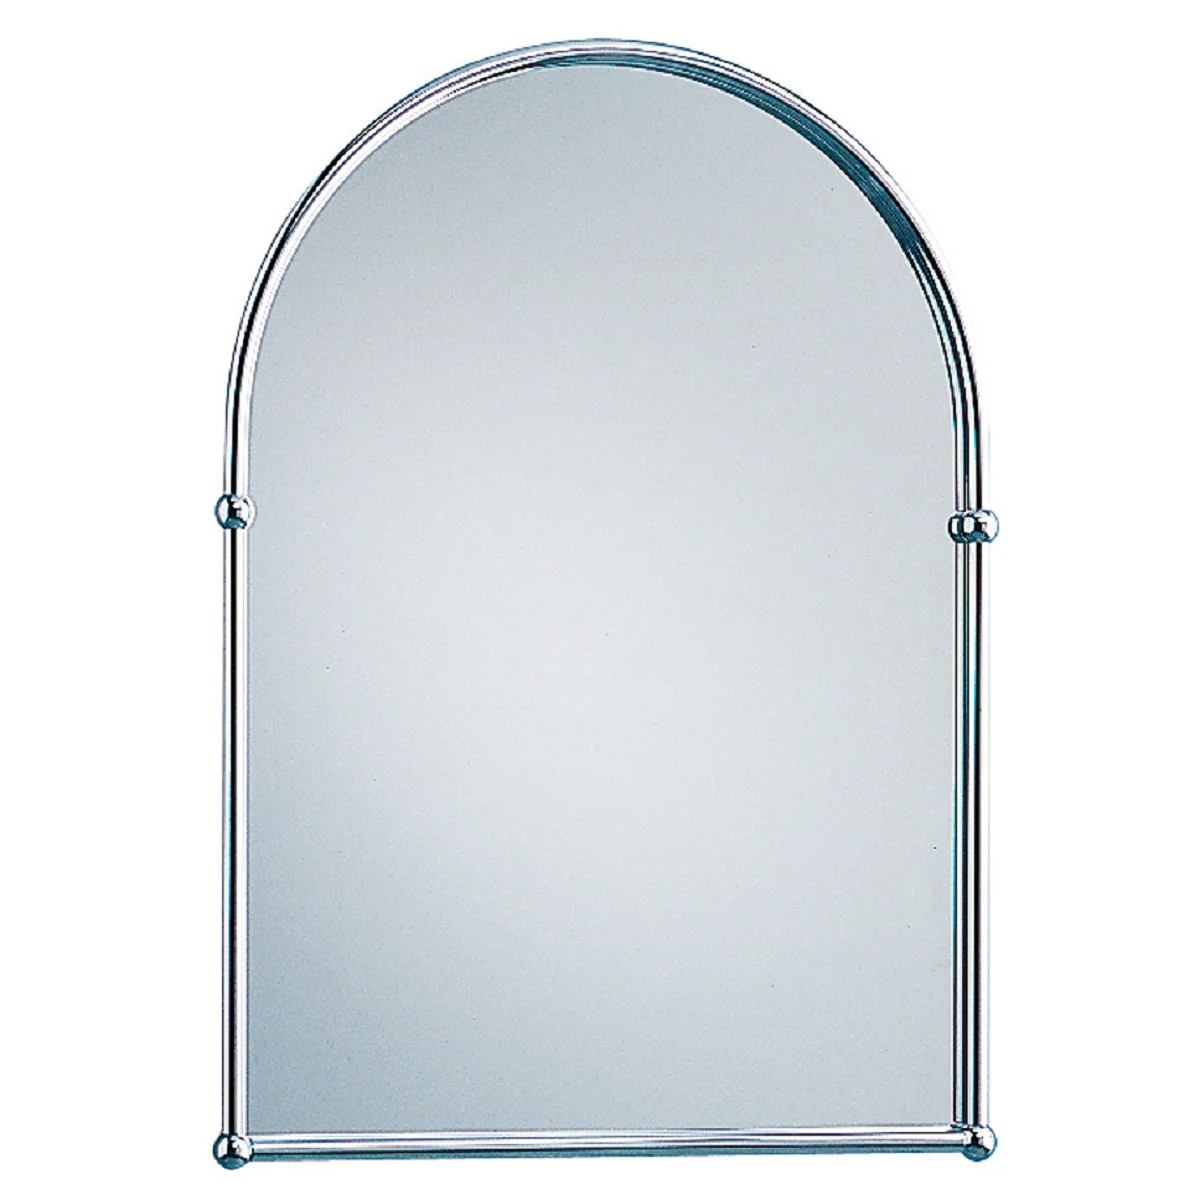  Chrome Arched Mirror